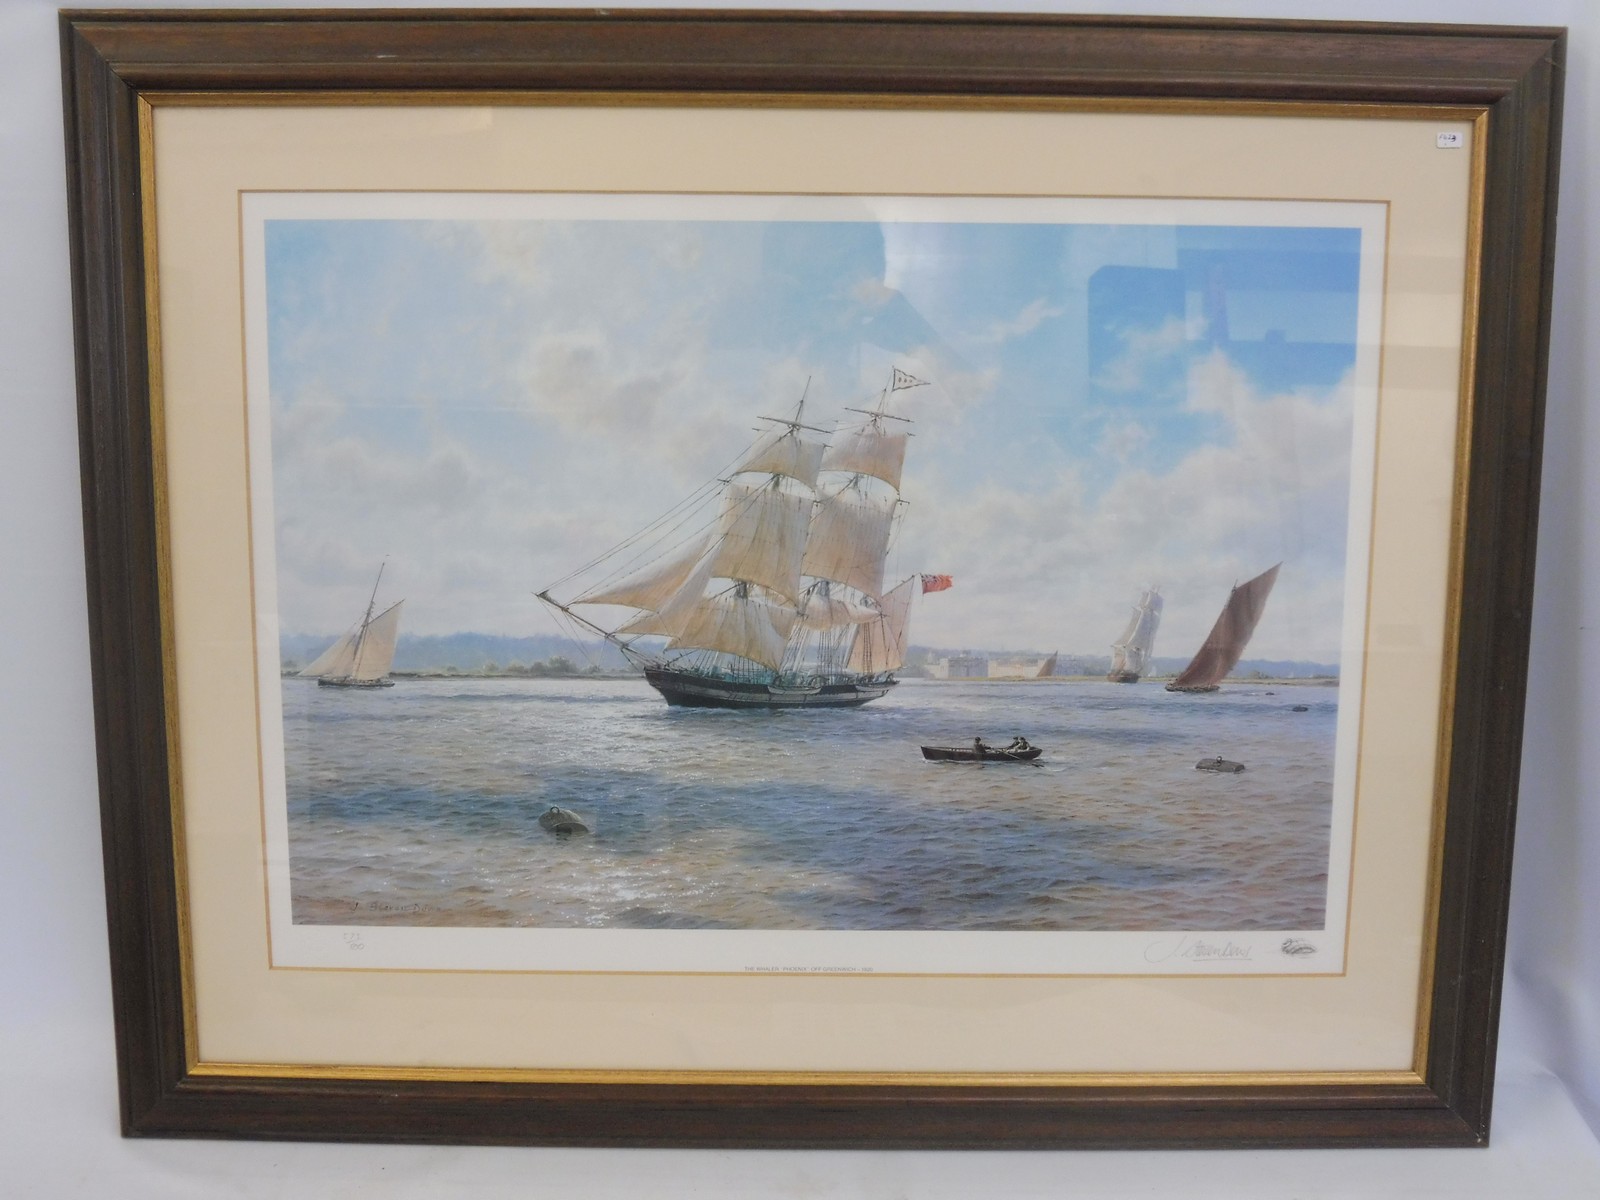 STEVEN DEWS - The Whaler 'Pheonix' off Greenwich 1820, a limited edition print 573/800, signed by